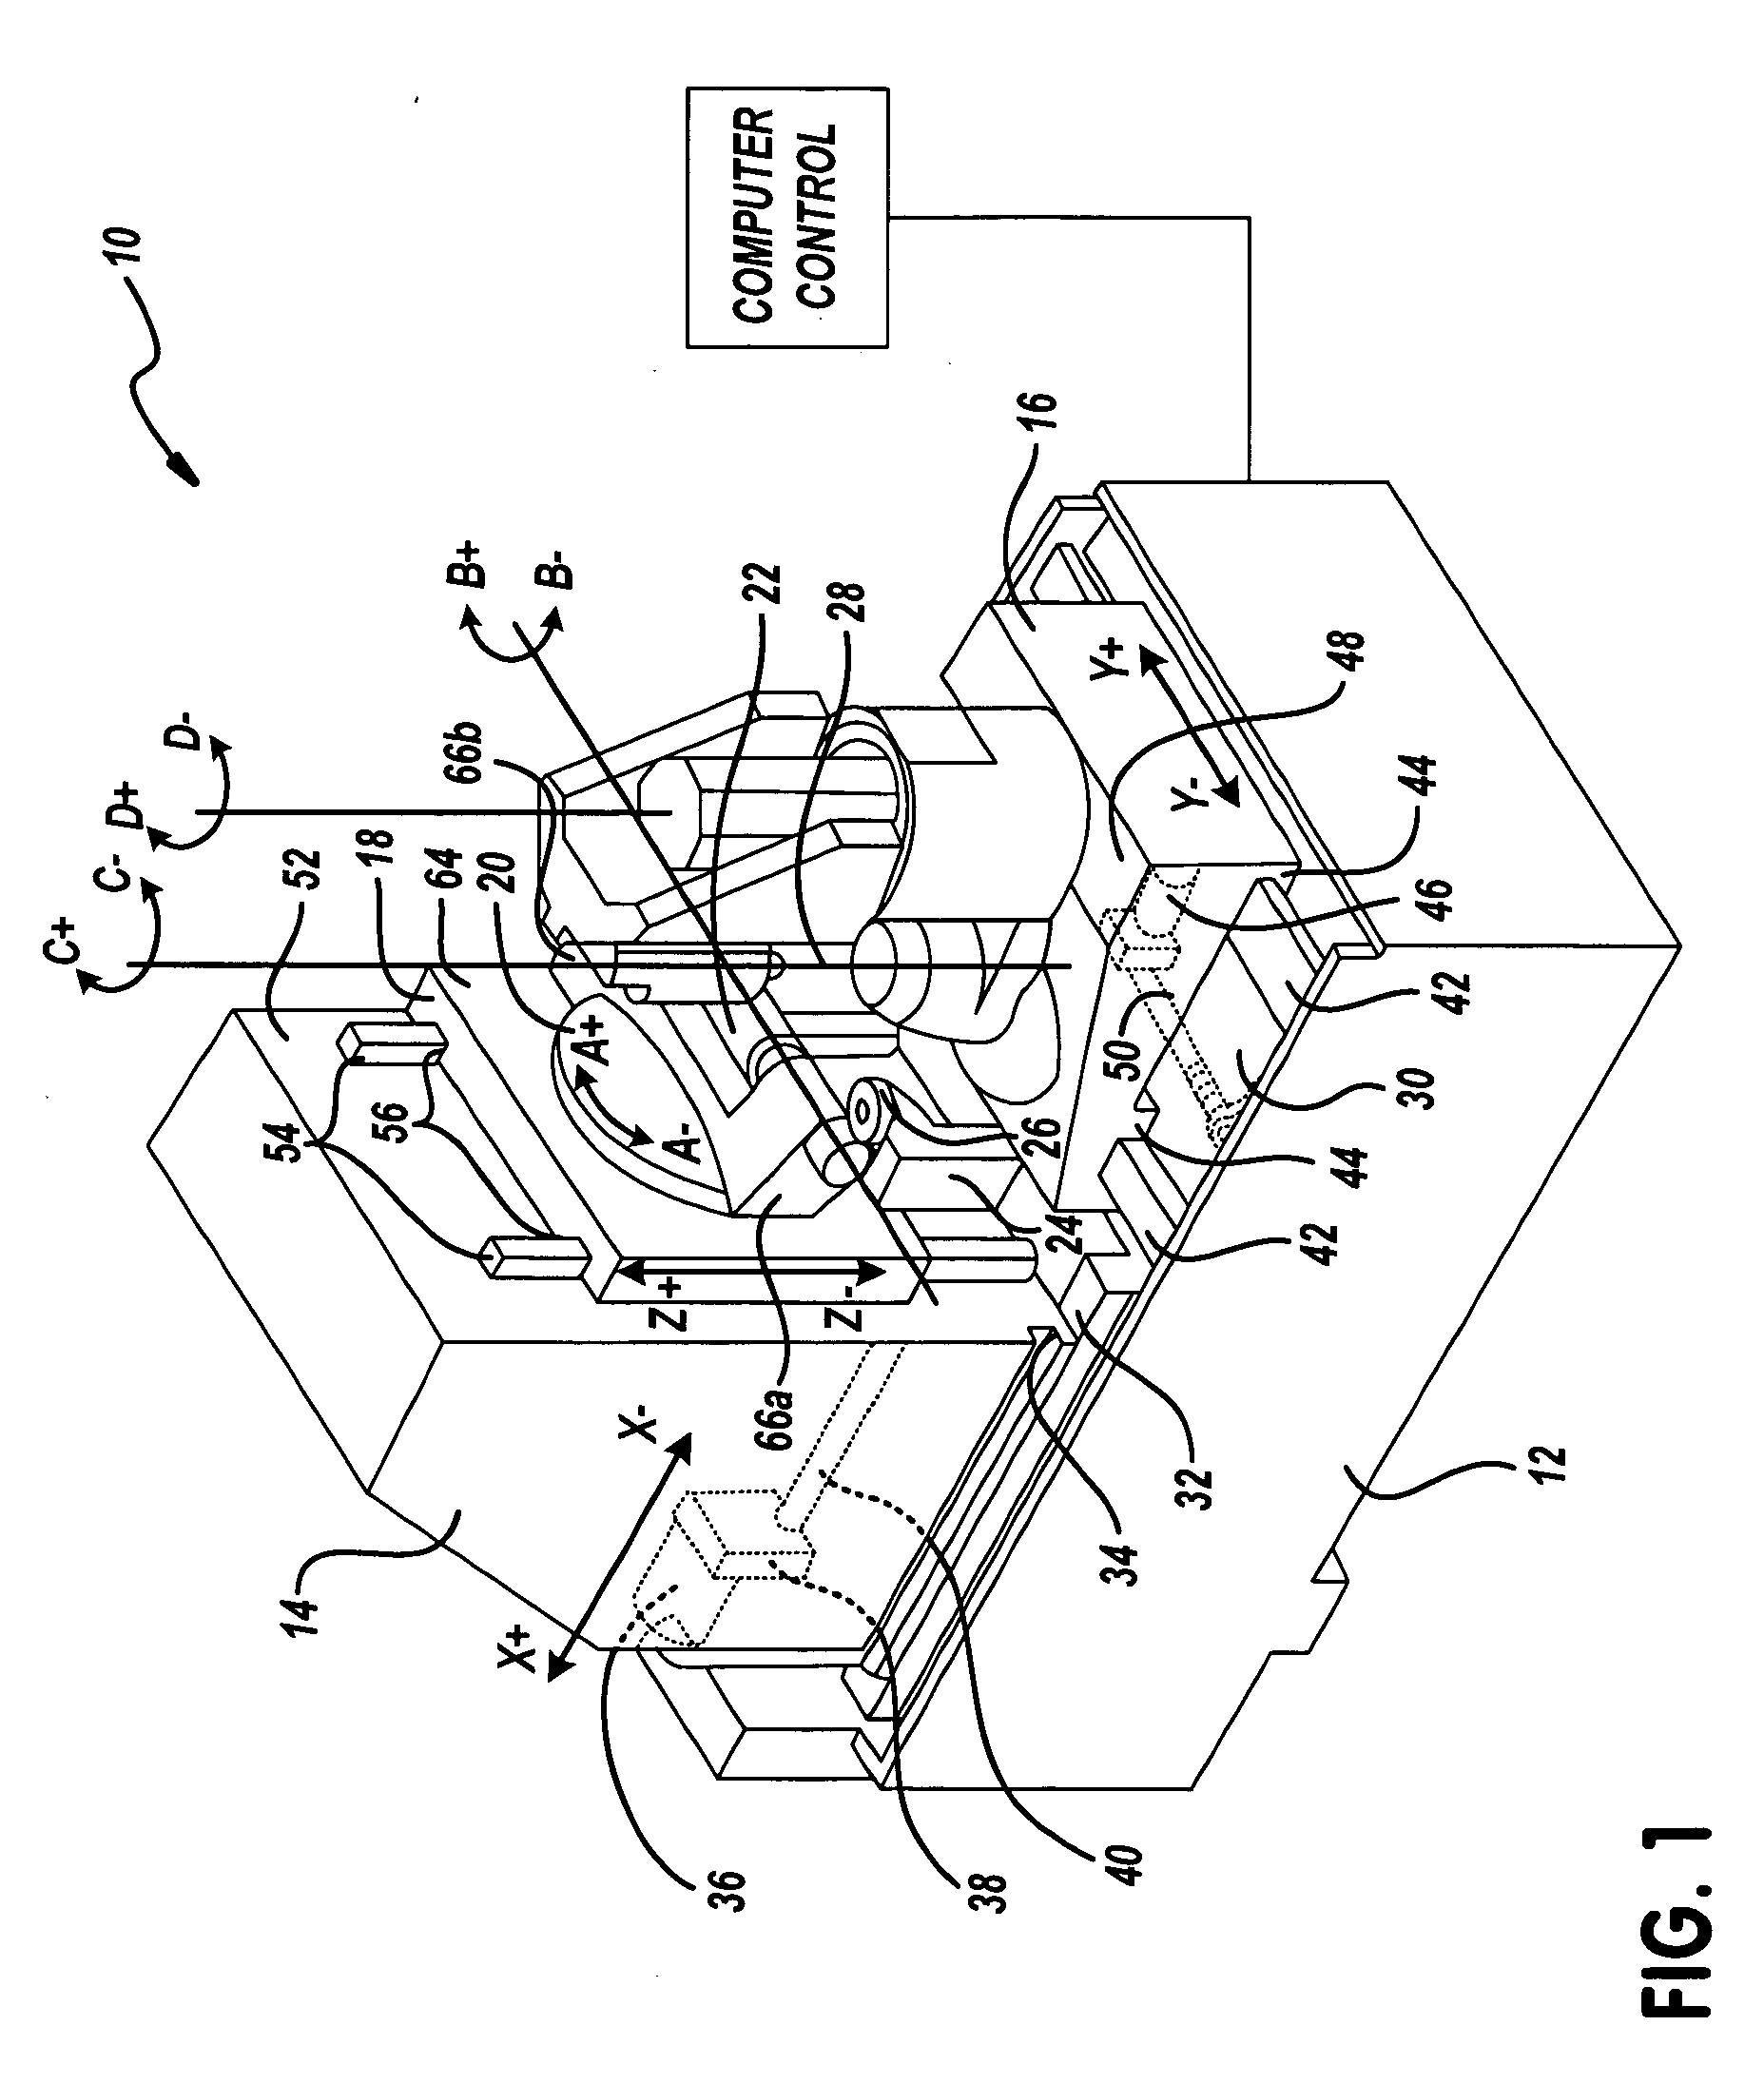 Multiple operation gear manufacturing apparatus with common work axis